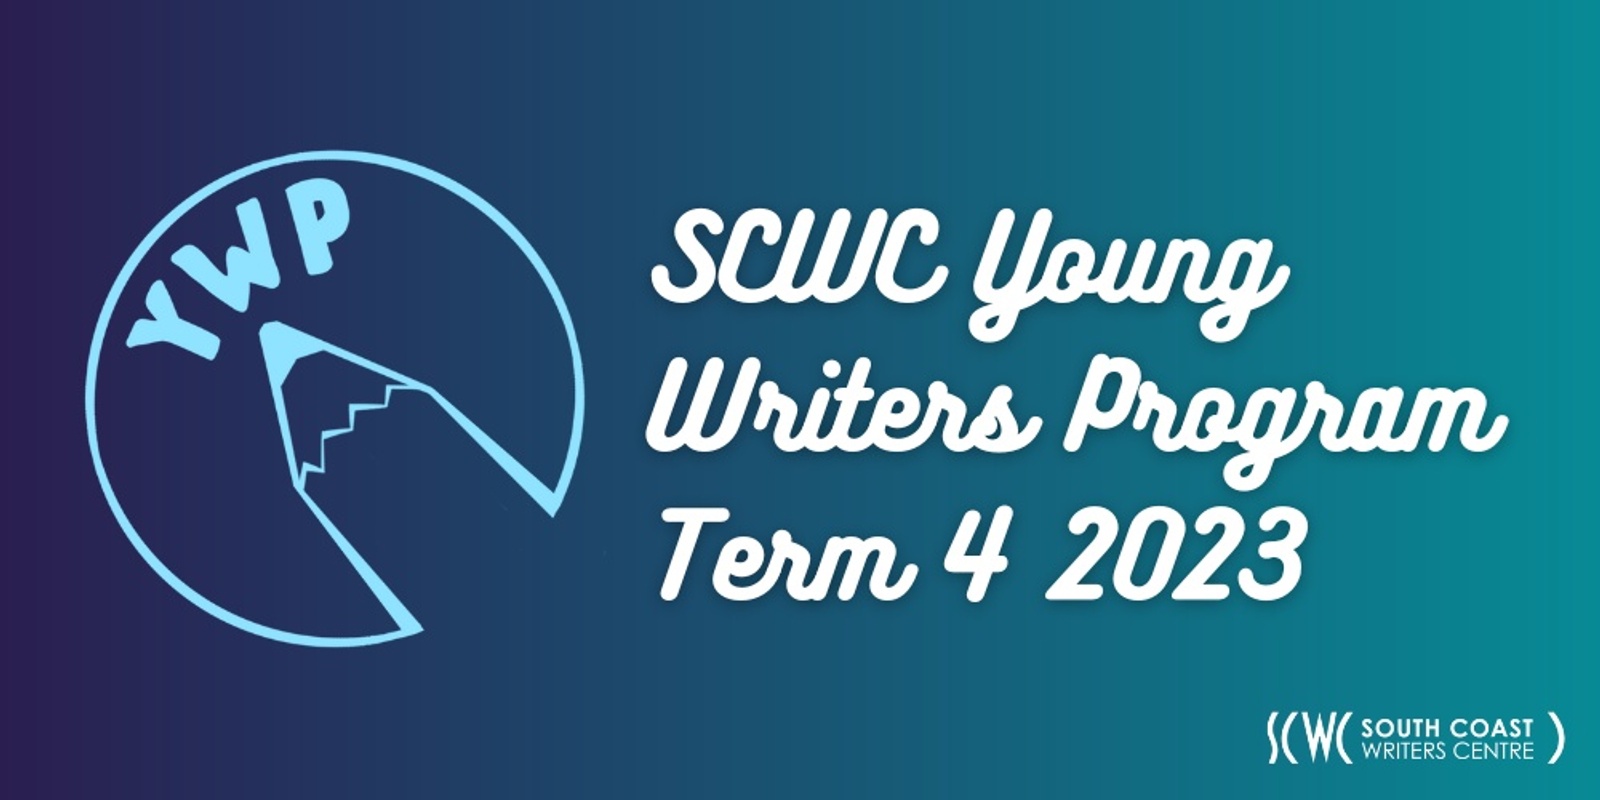 Banner image for SCWC Young Writers Groups - Term 4 2023